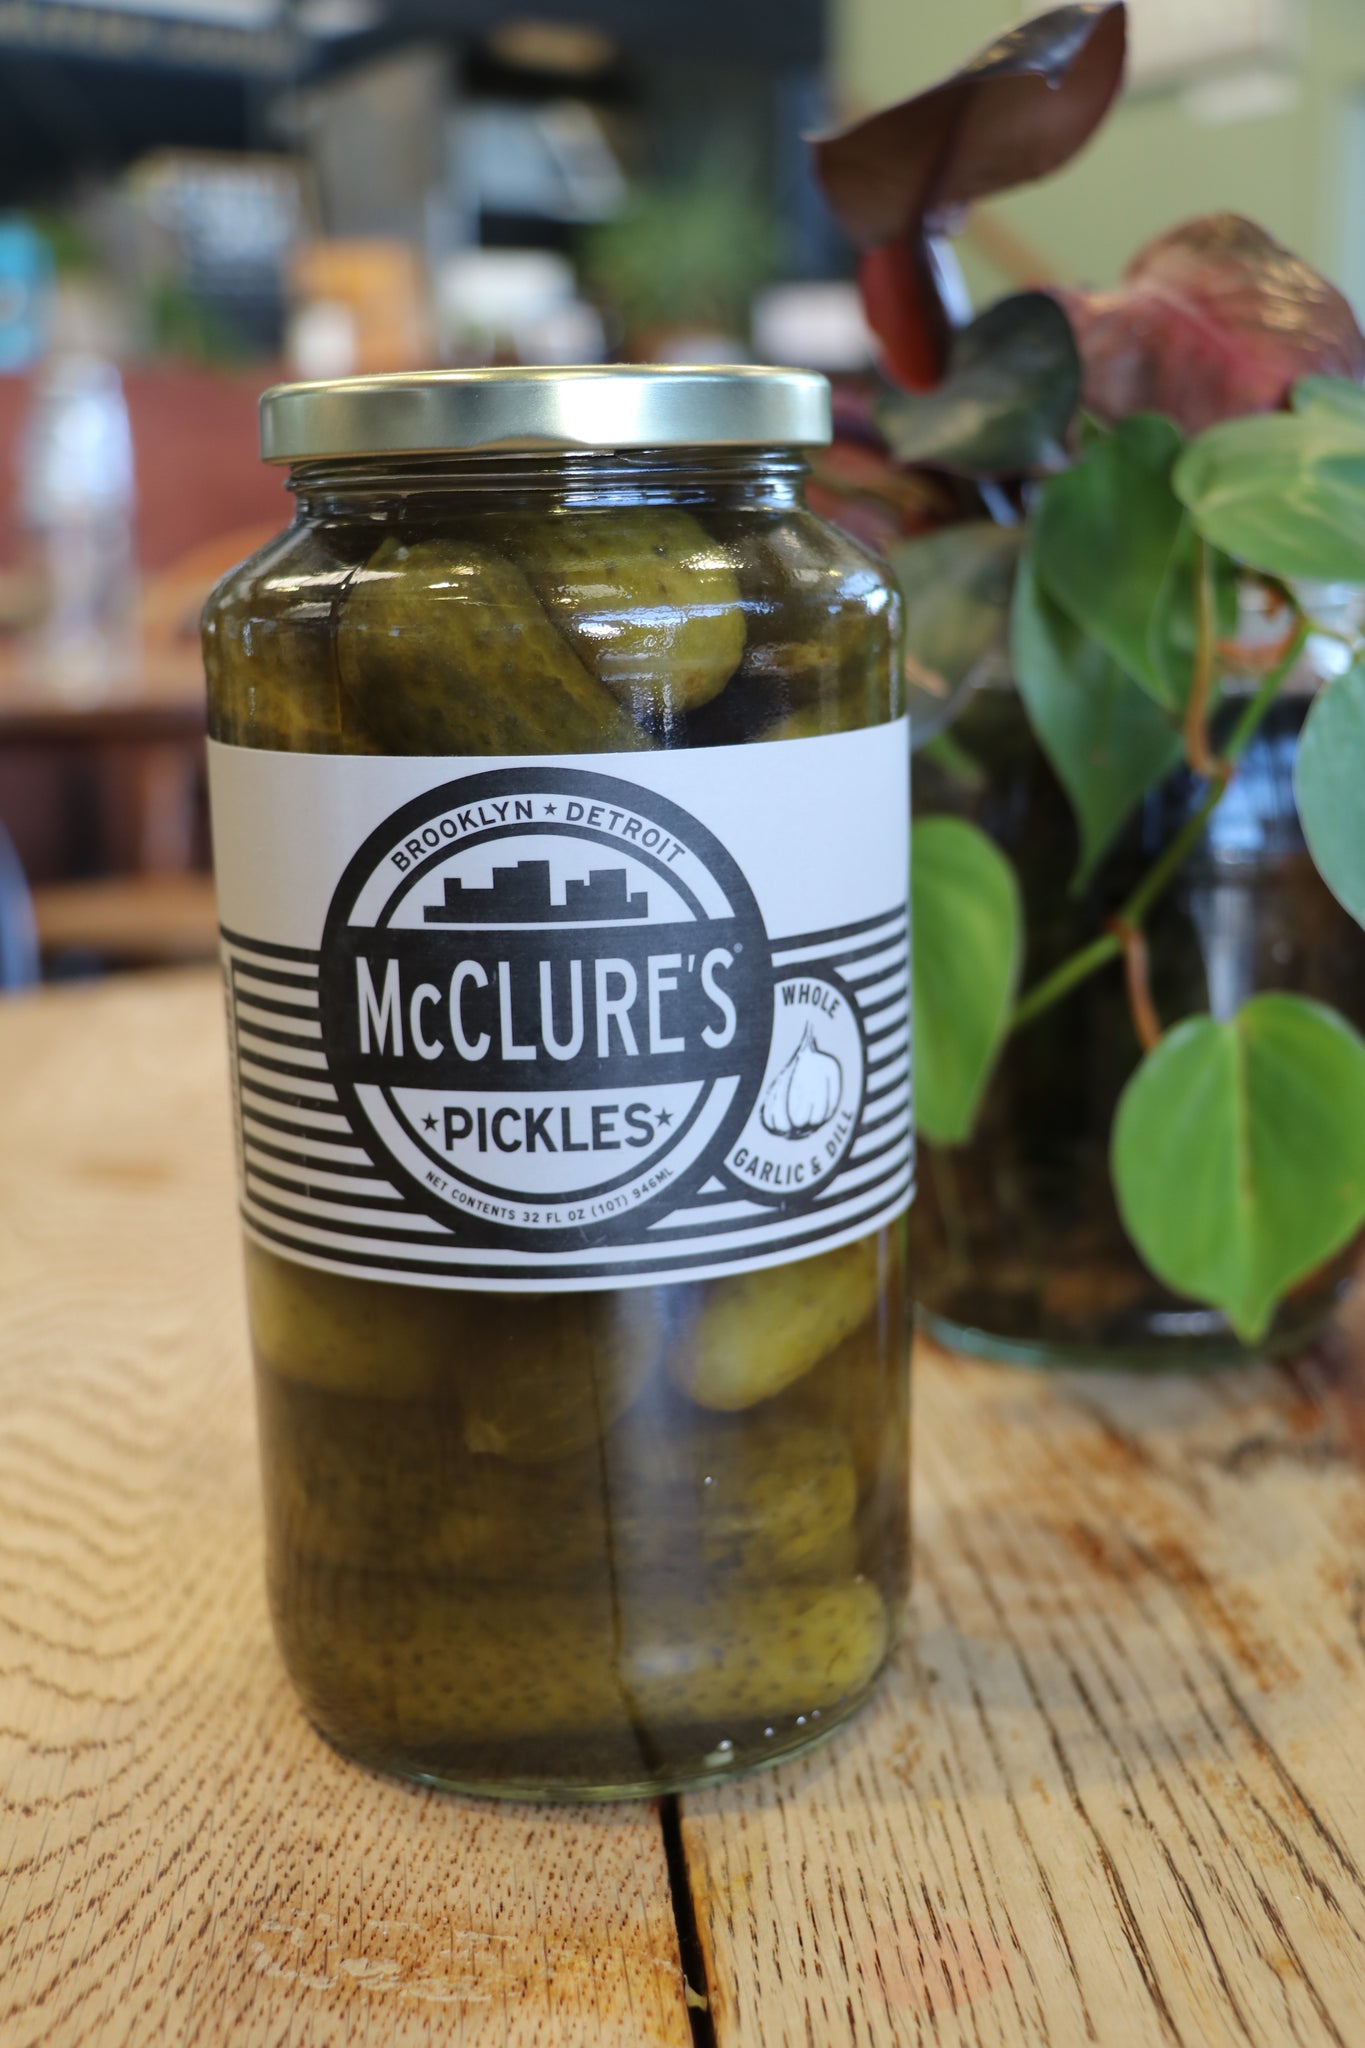 McClure's Pickles Whole Garlic & Dill Pickles 907g jar